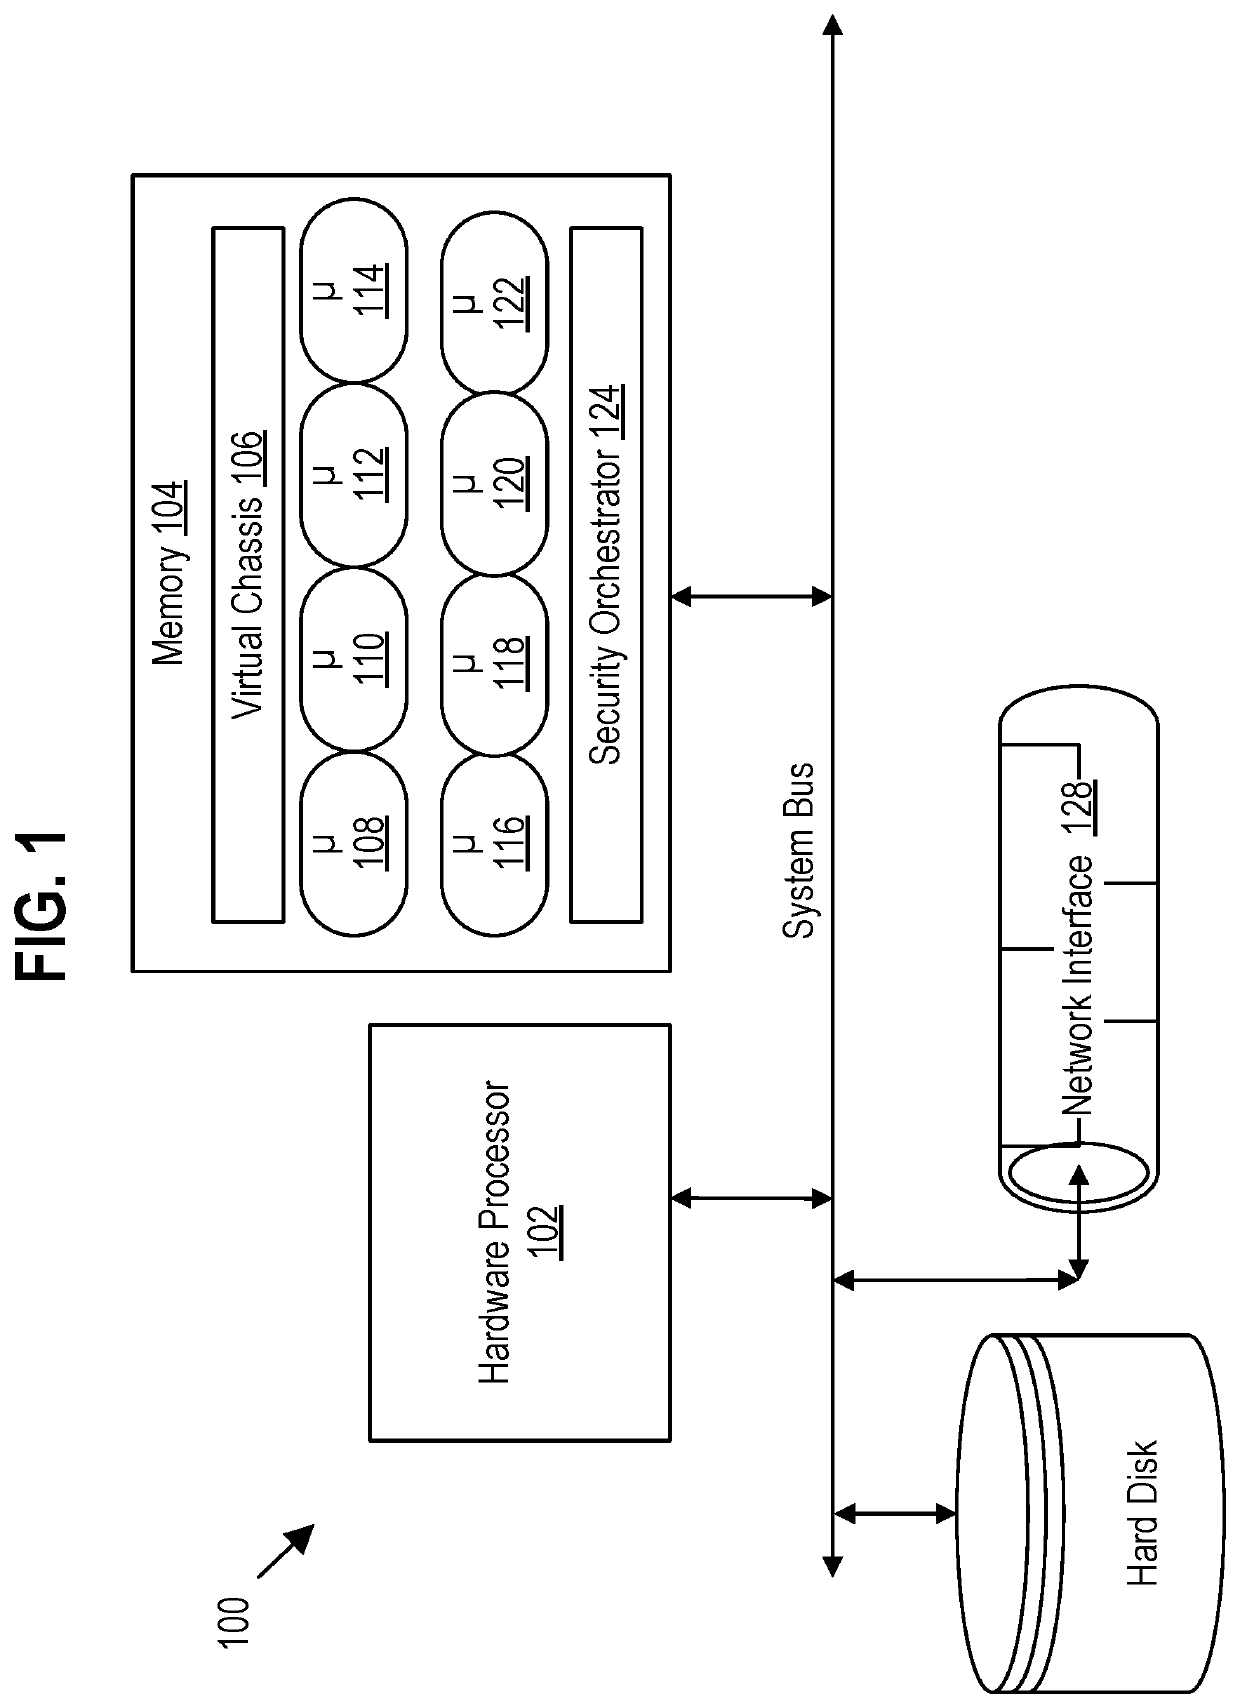 Systems and methods for managing endpoints and security policies in a networked environment